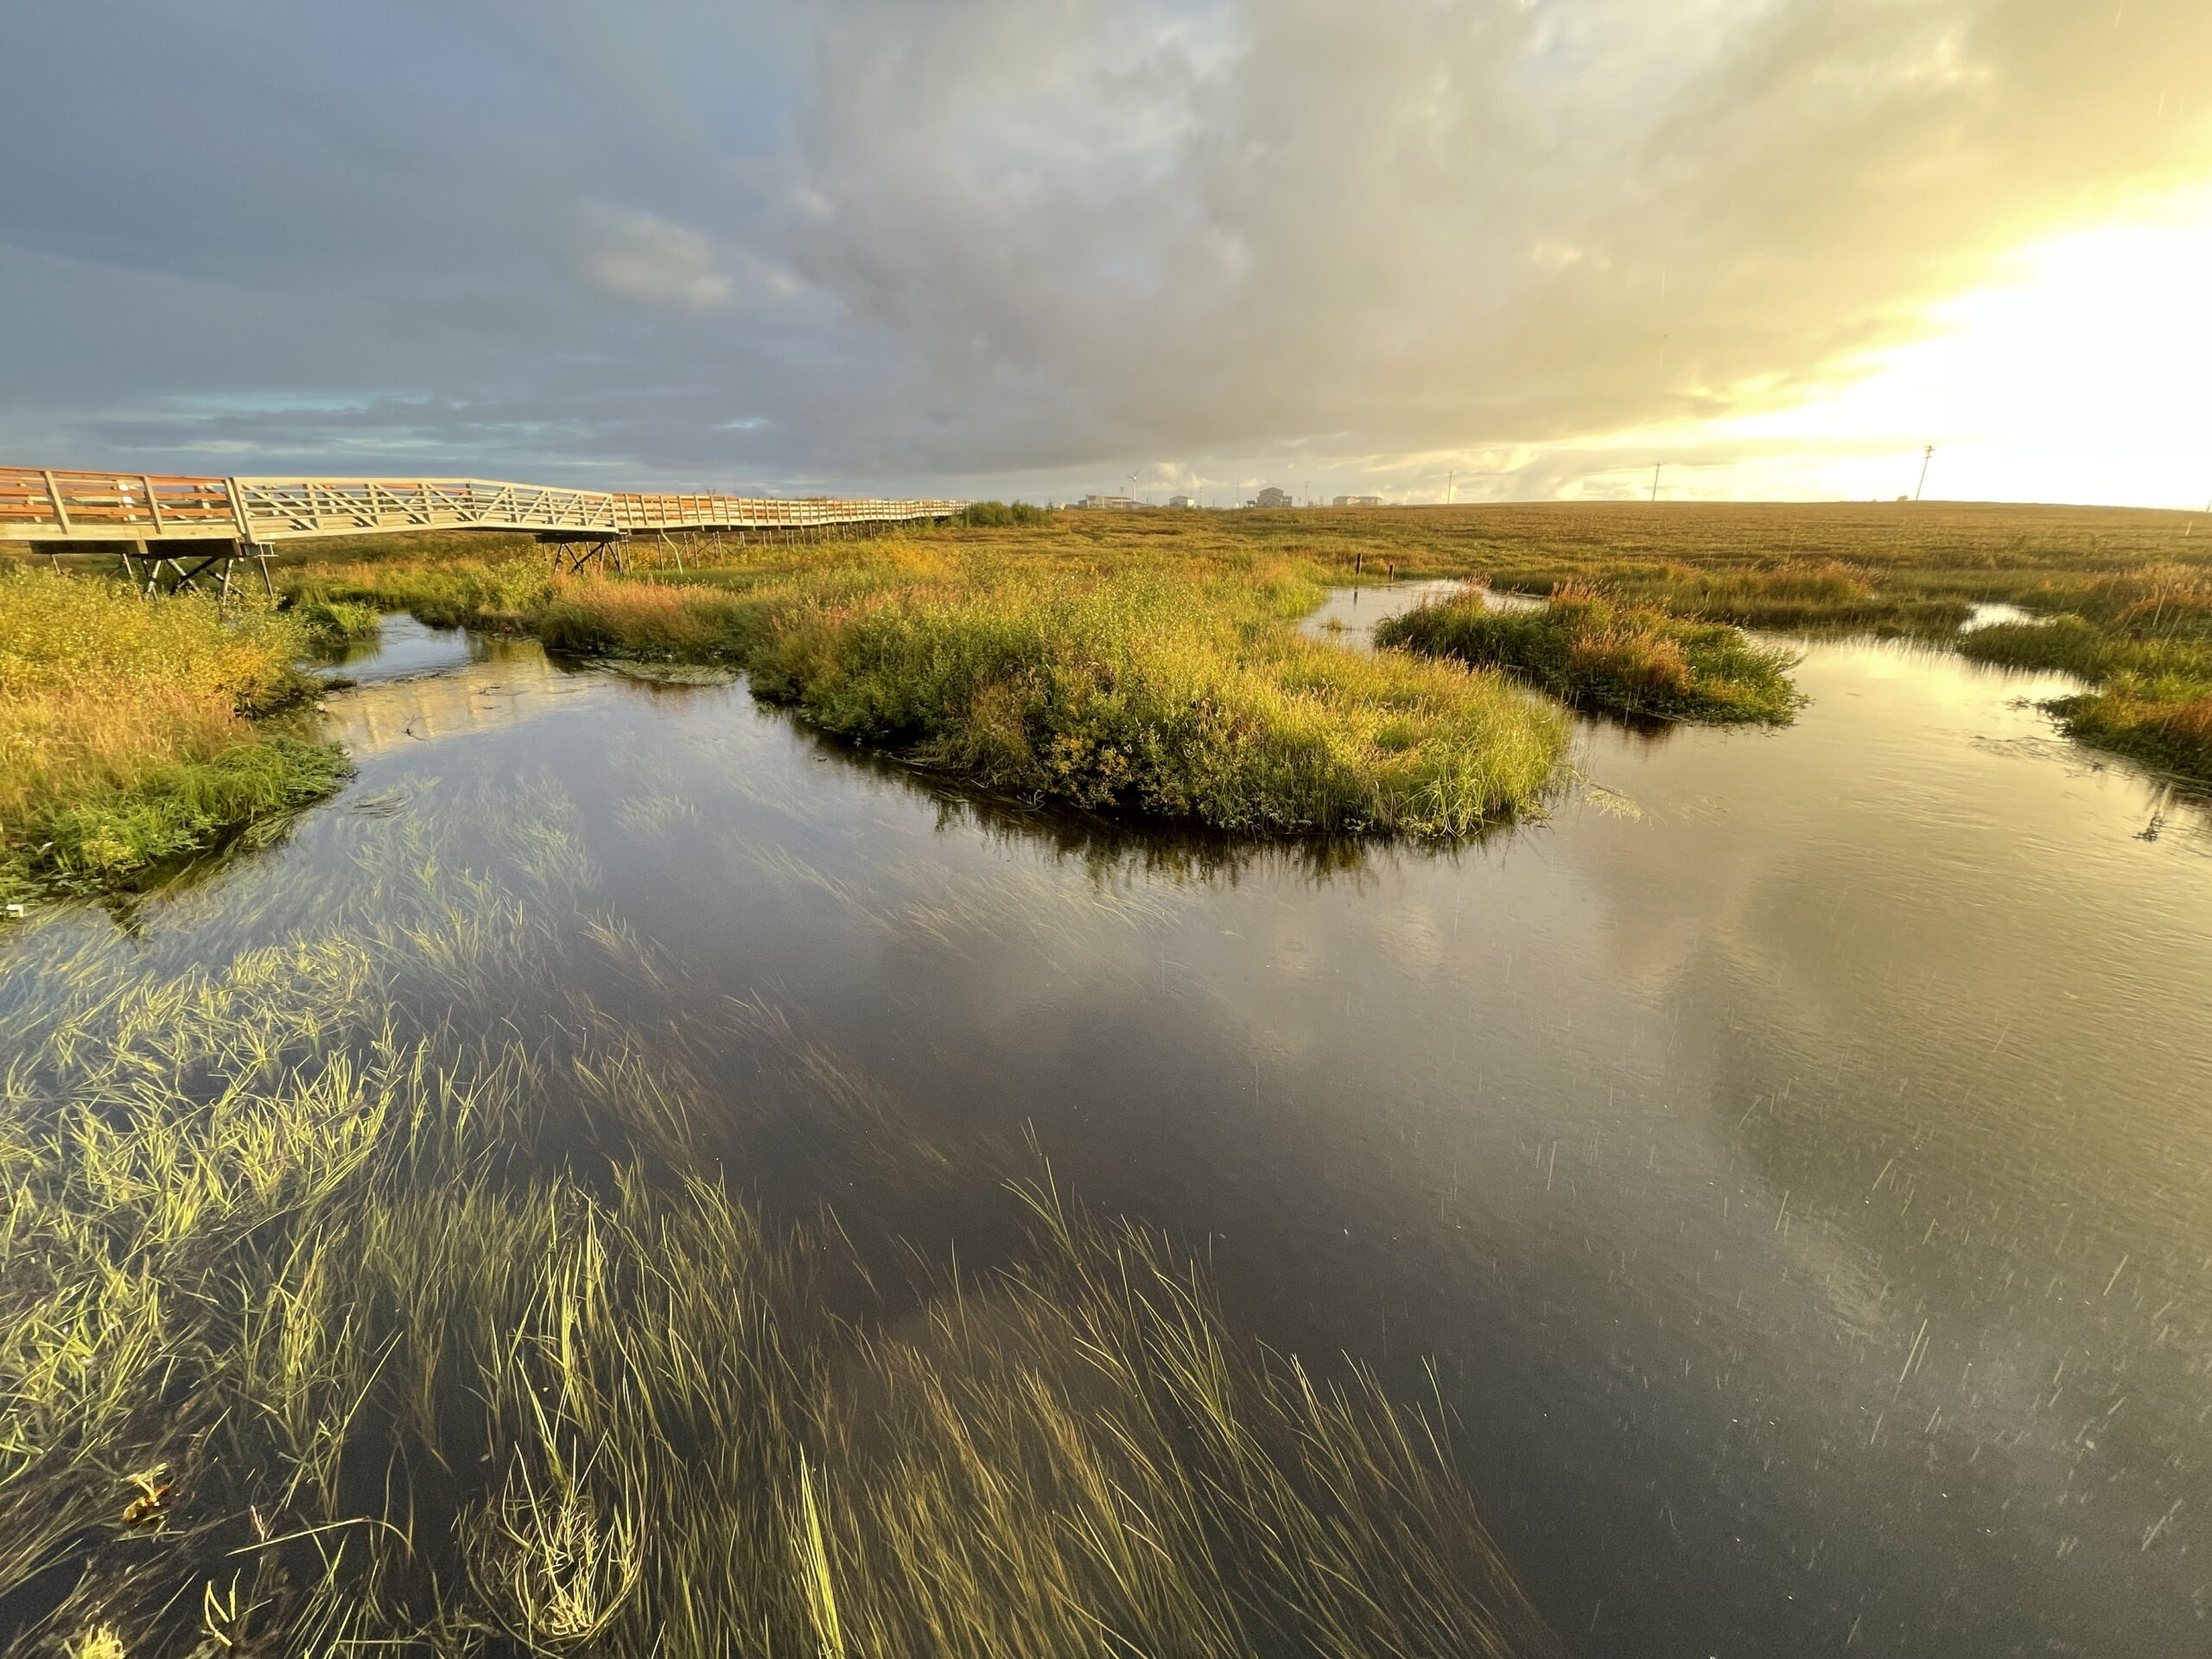 underwater grasses in a tundra pond, with a boardwalk